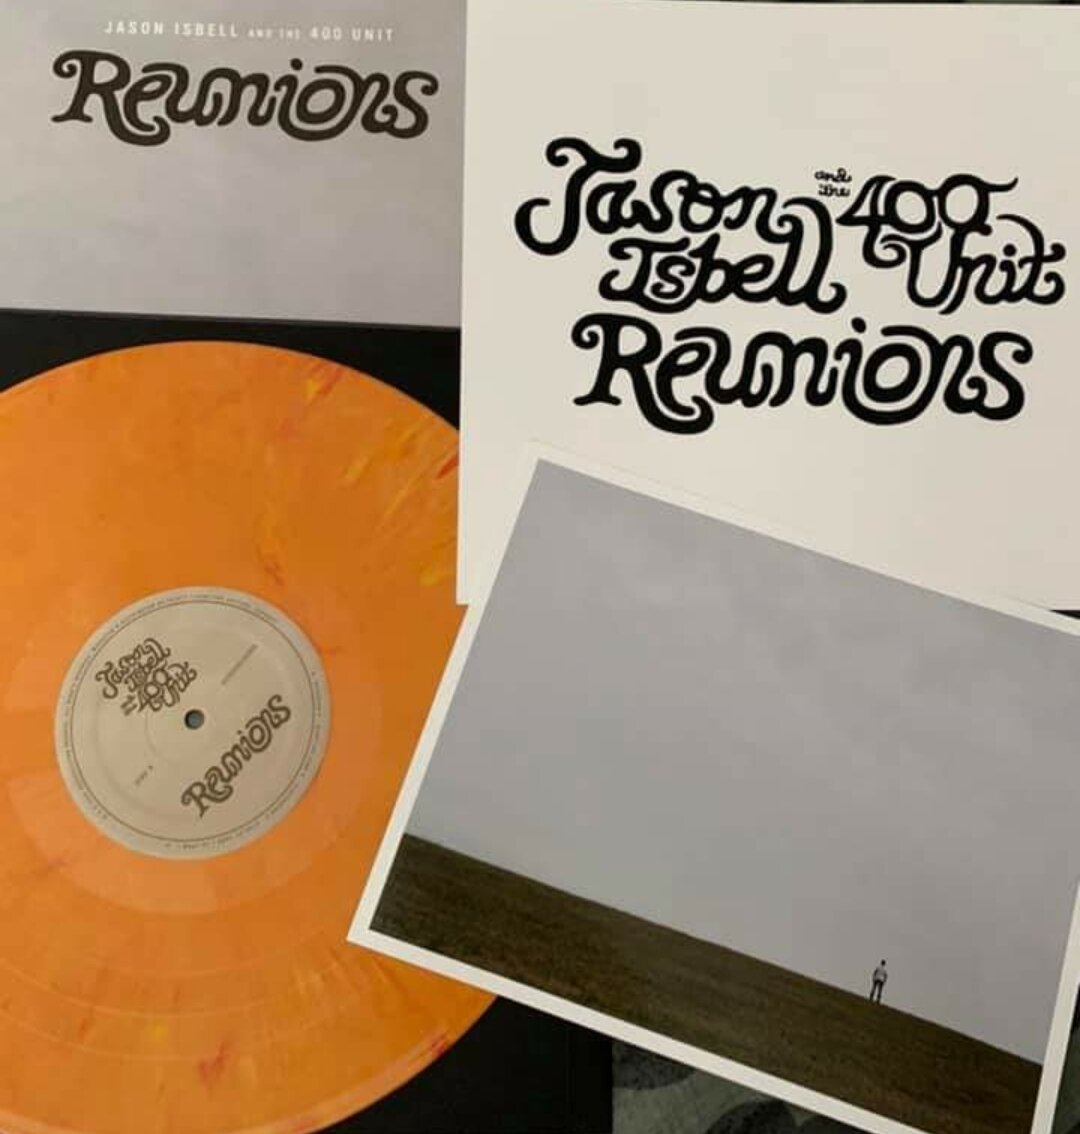 Reunions, Jason Isbell and the 400 Unit